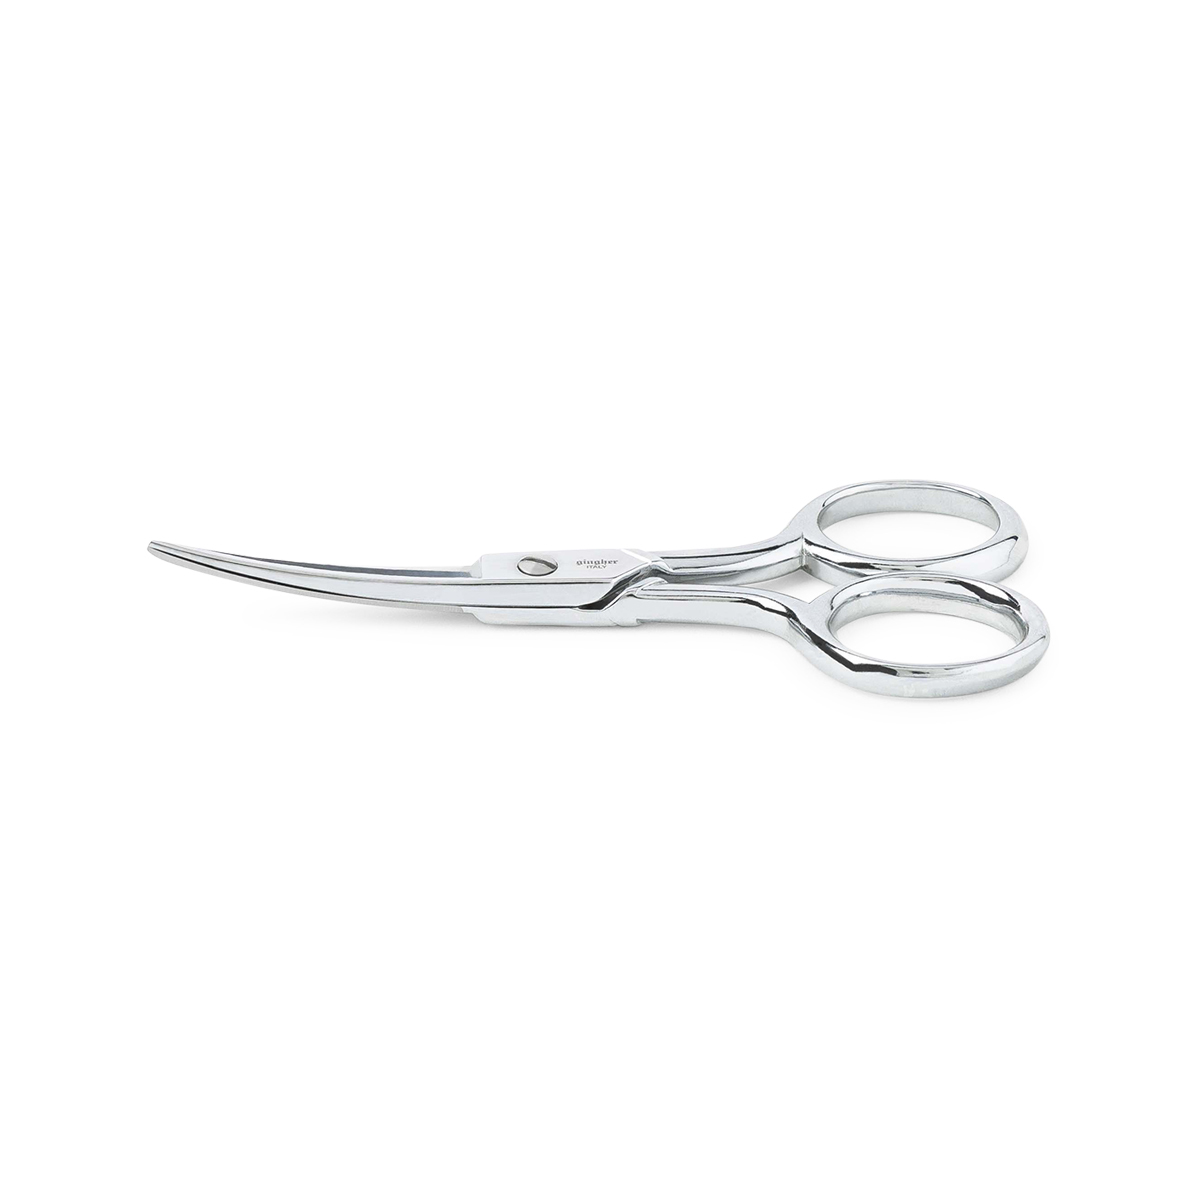 4.5 Double Curved Machine Embroidery Scissors (German Stainless